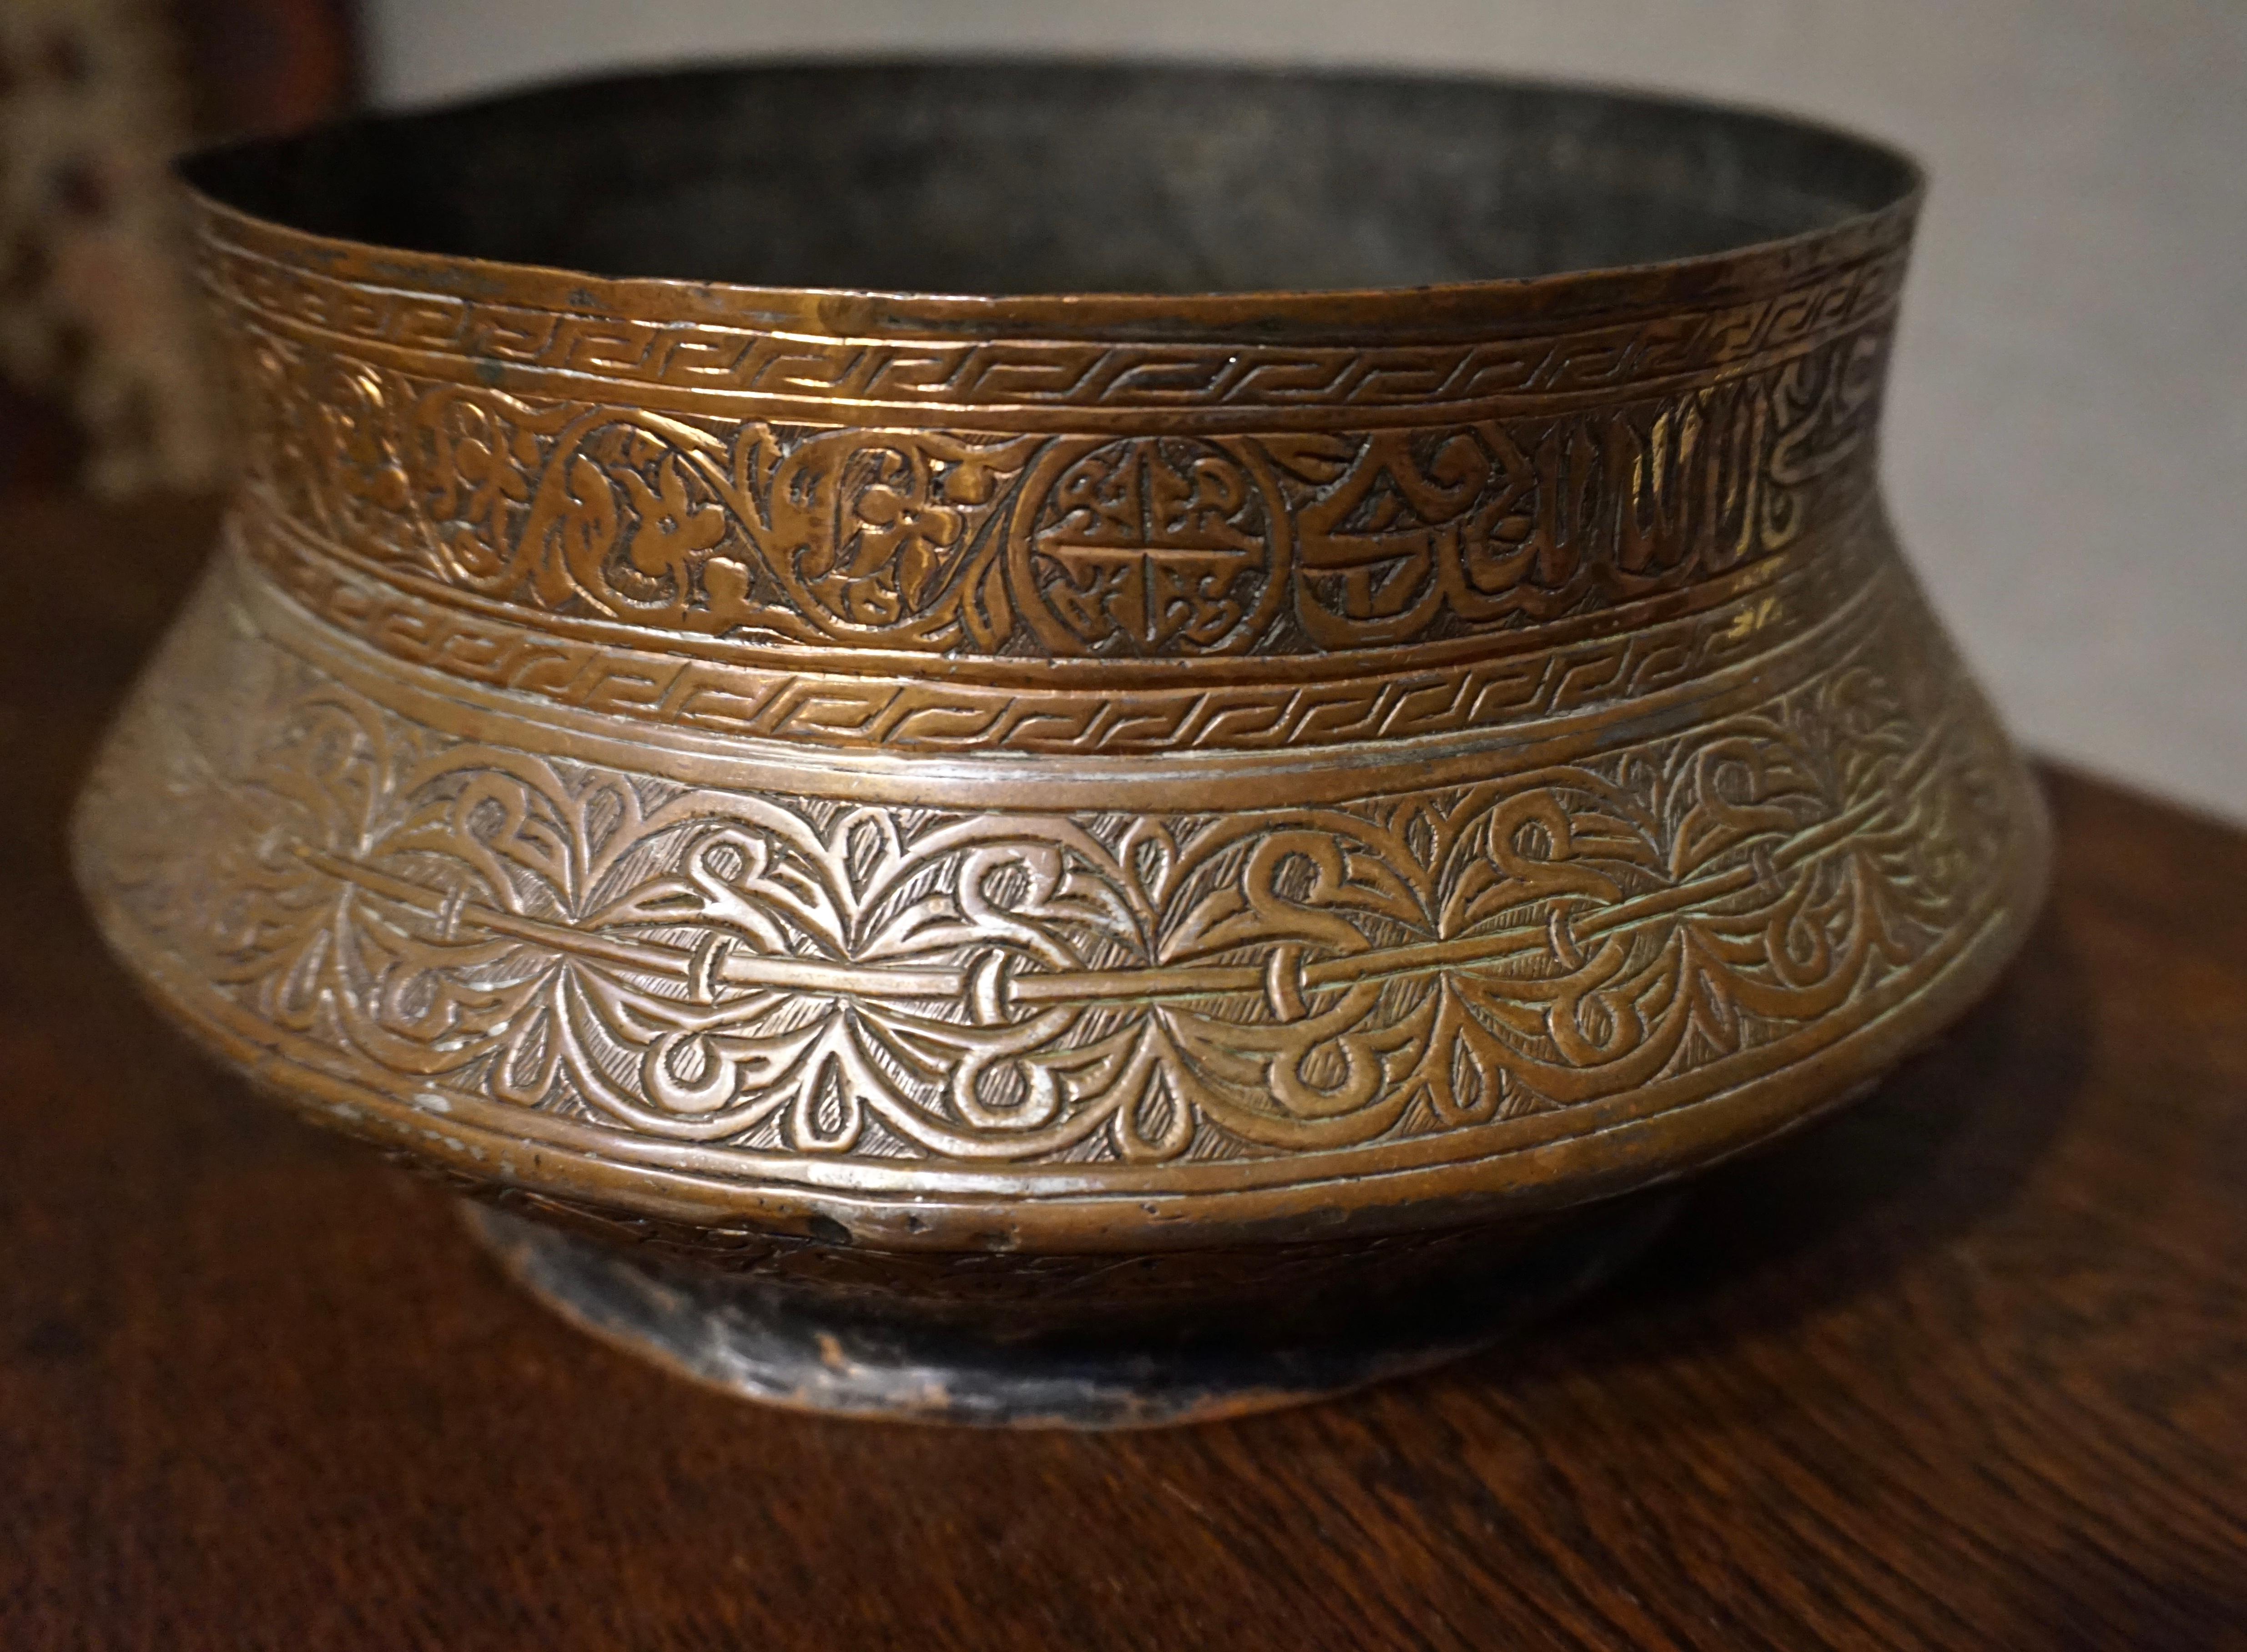 Rare Ottoman hand engraved copper and bronze bowl in original condition. Fine engraving and well proportioned conversation piece. Original patina still maintains tarnished lustre. Measures: 10